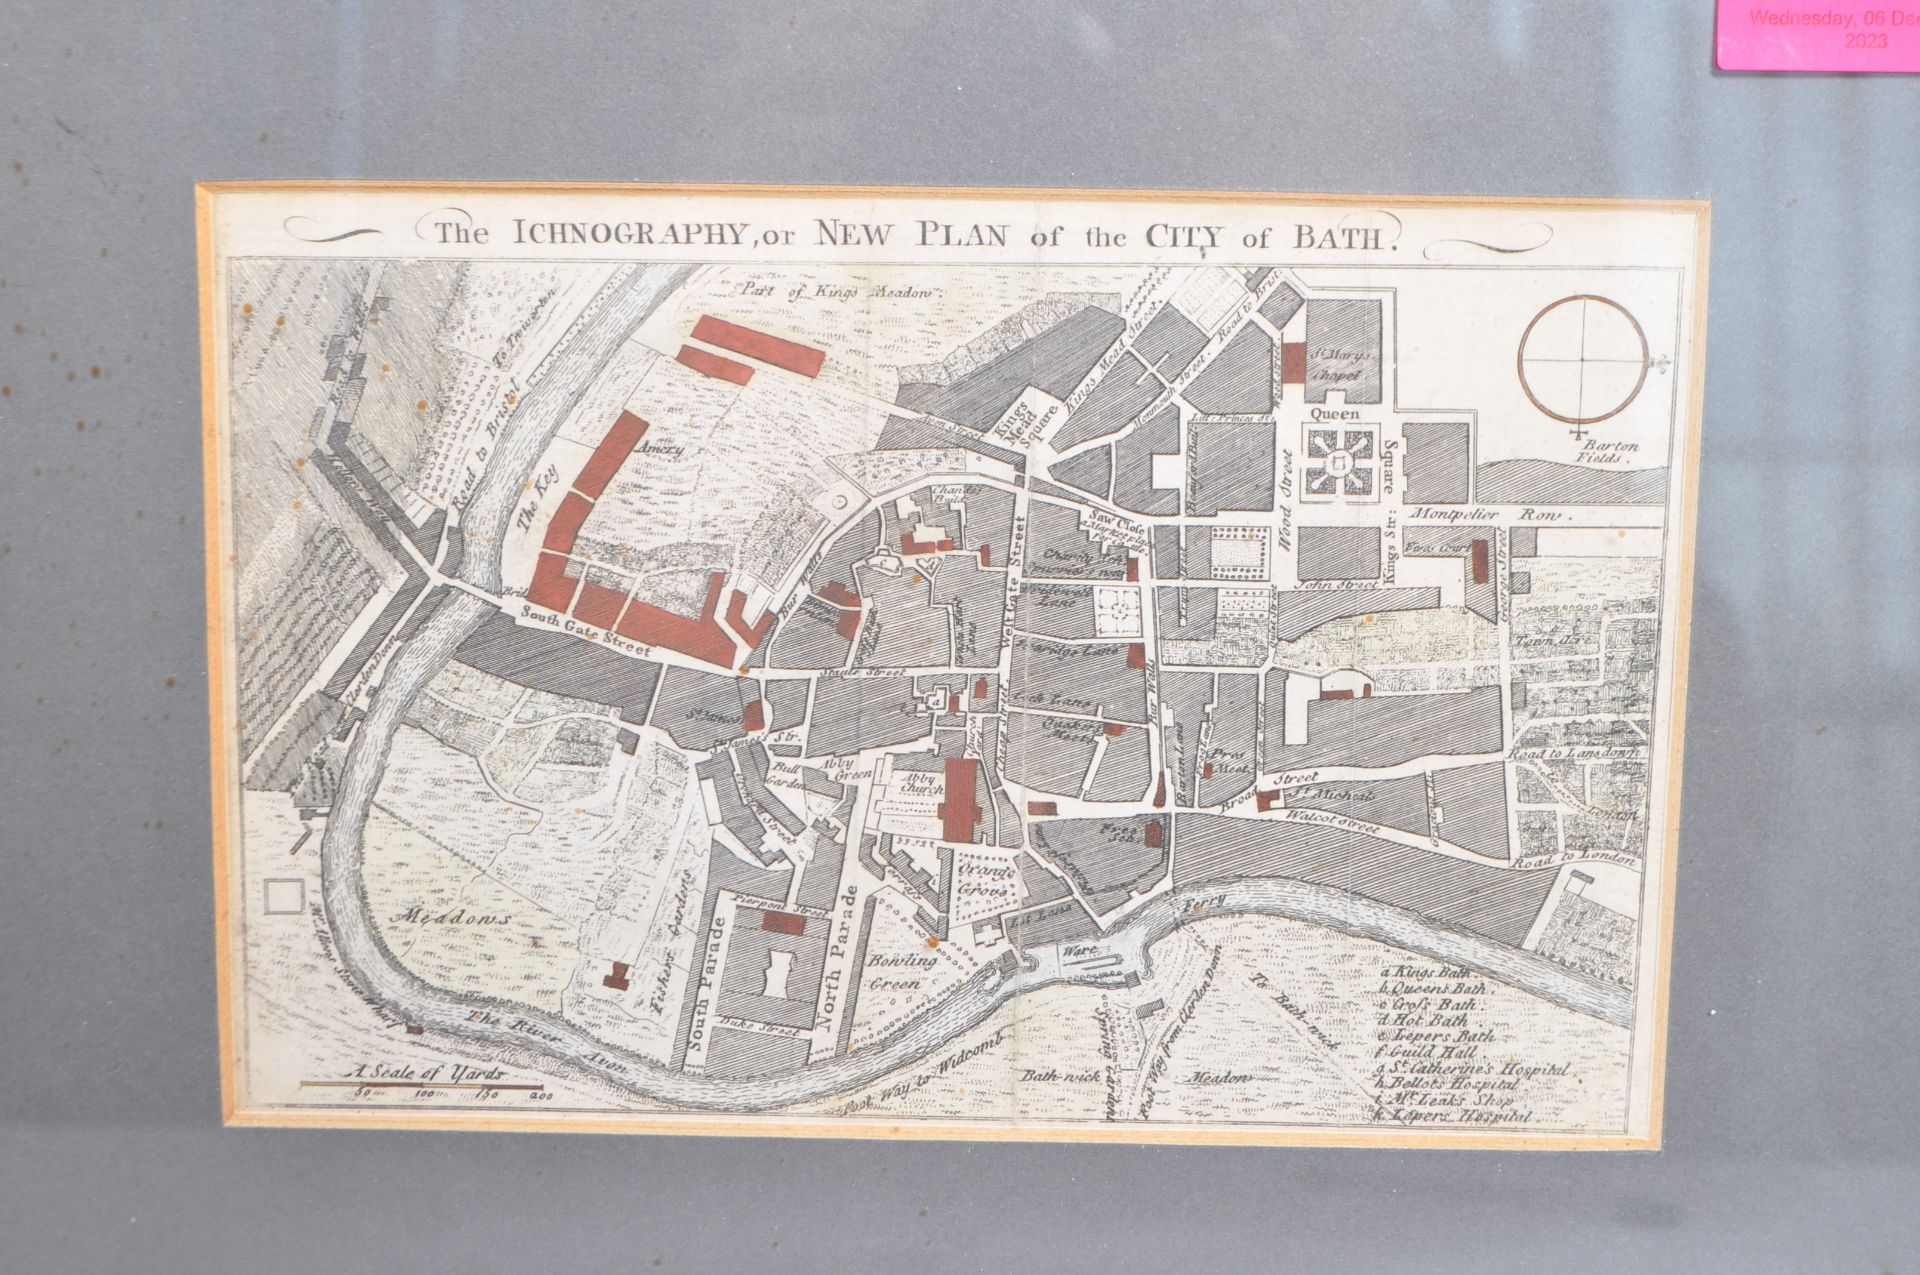 THE ICHNOGRAPHY OF NEW PLAN OF THE CITY OF BATH & ANOTHER - Image 3 of 6